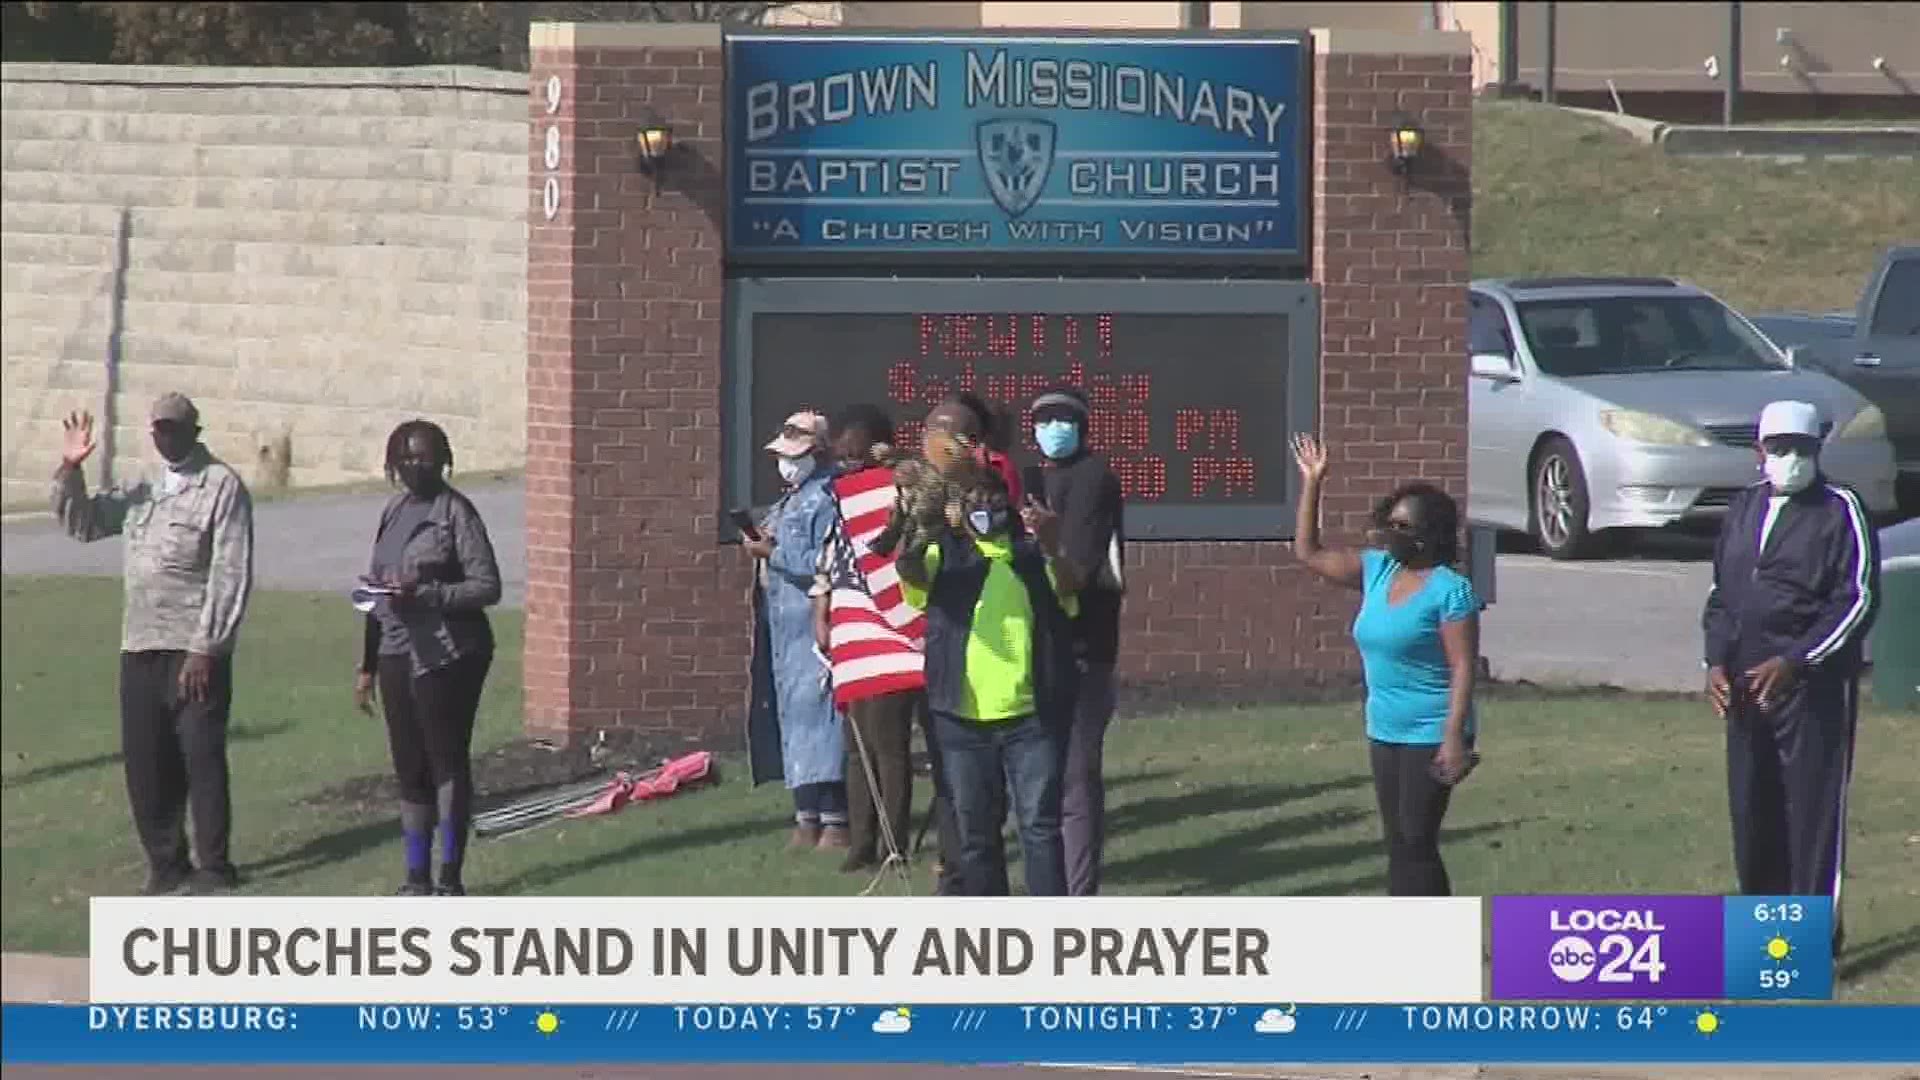 The prayer chain took place along Stateline Road in Southaven, Mississippi.